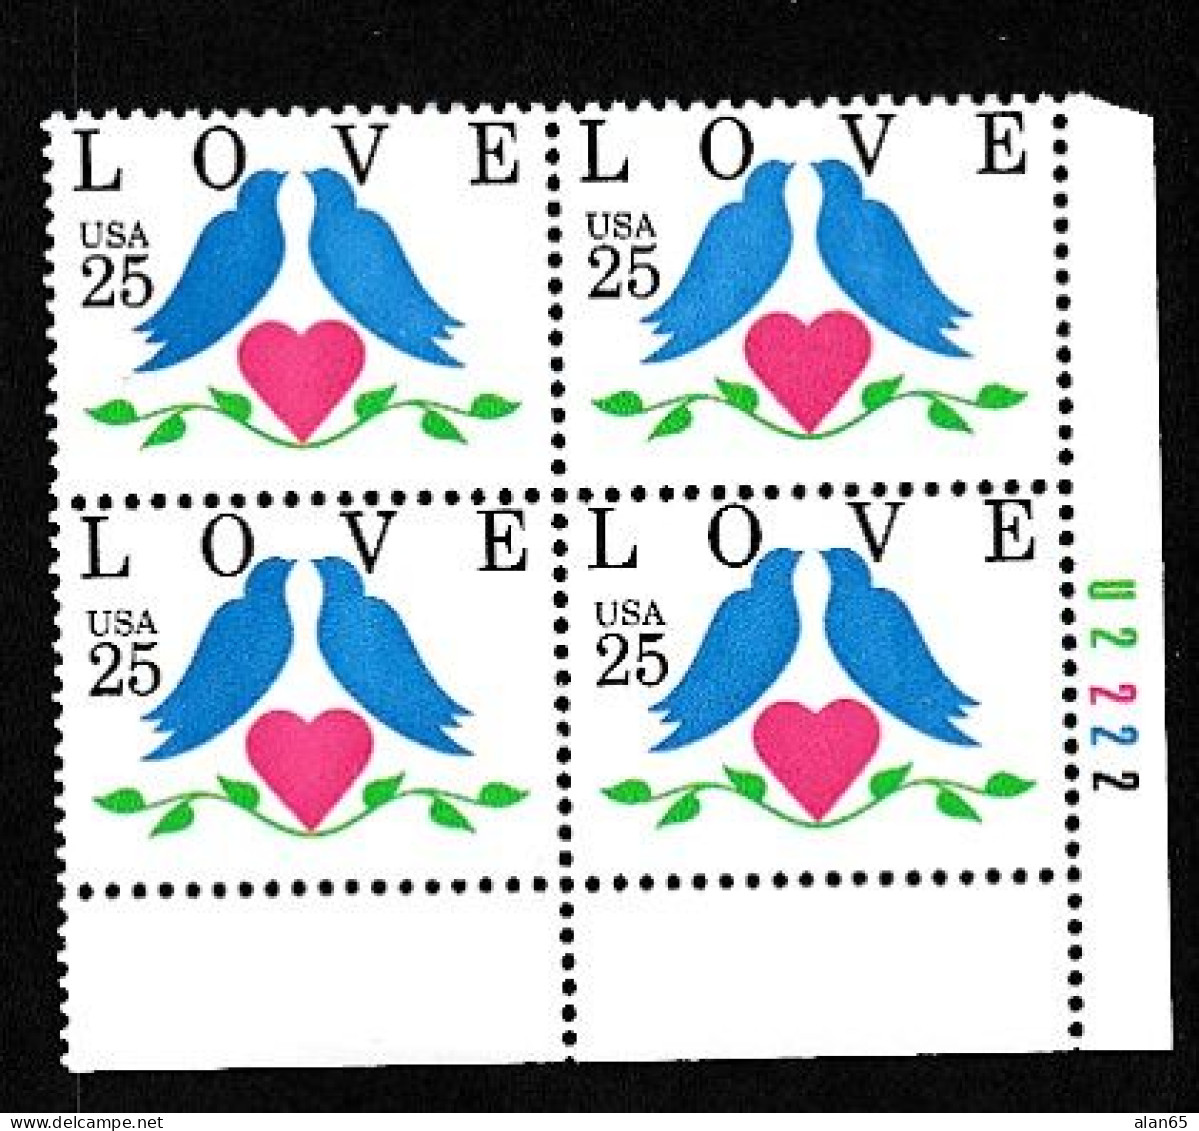 Sc#2440 'Love' Birds And Heart, 25-cent 1990 Issue, Plate # Block Of 4 MNH US Postage Stamps - Numero Di Lastre